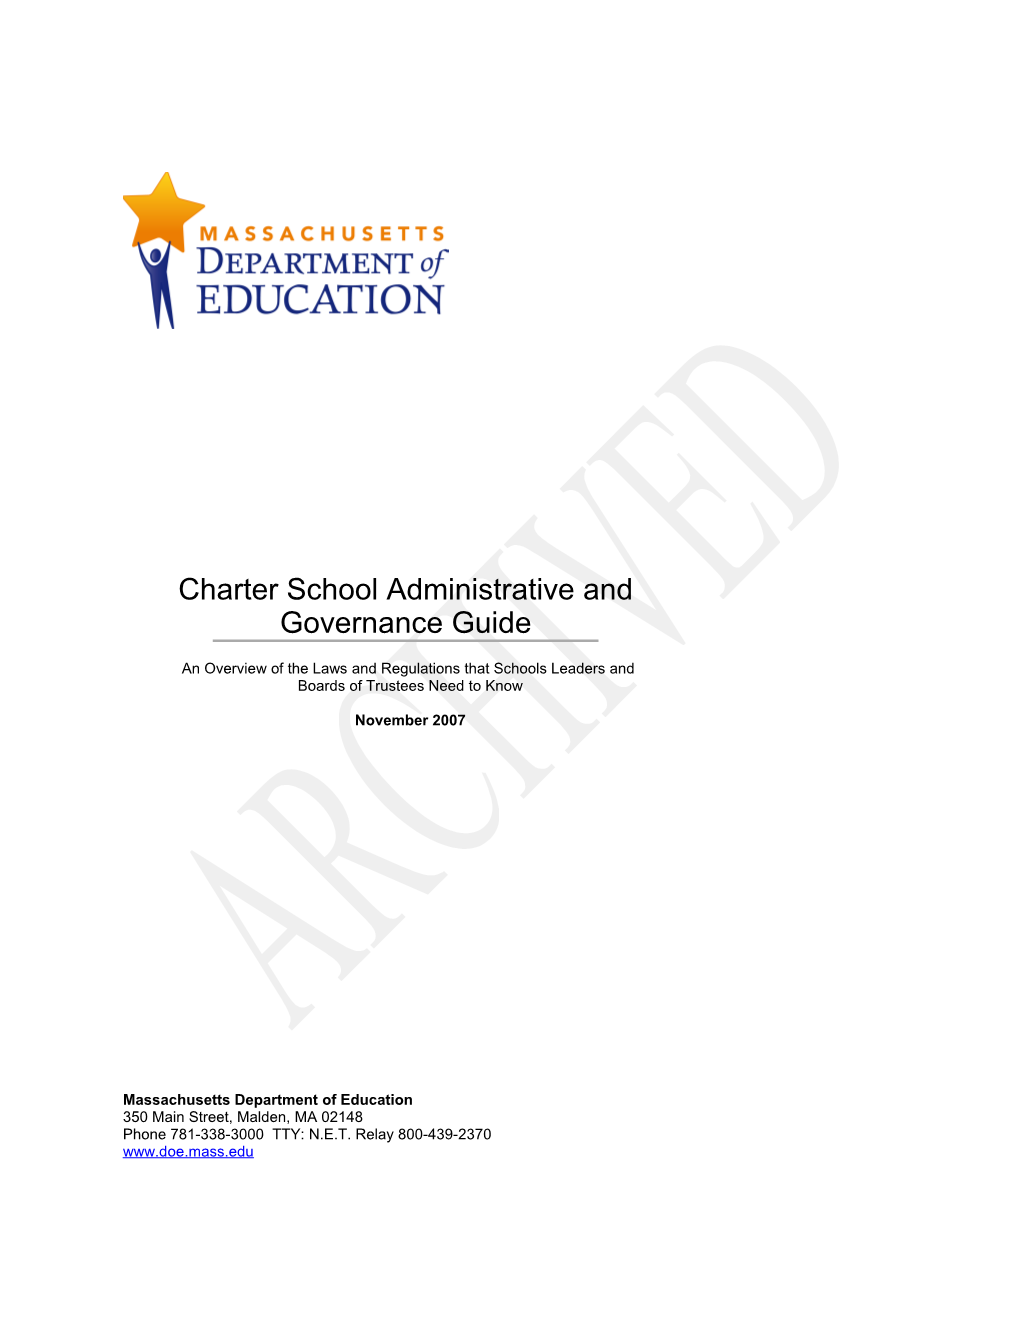 Charter School Administrative and Governance Guide November 2007